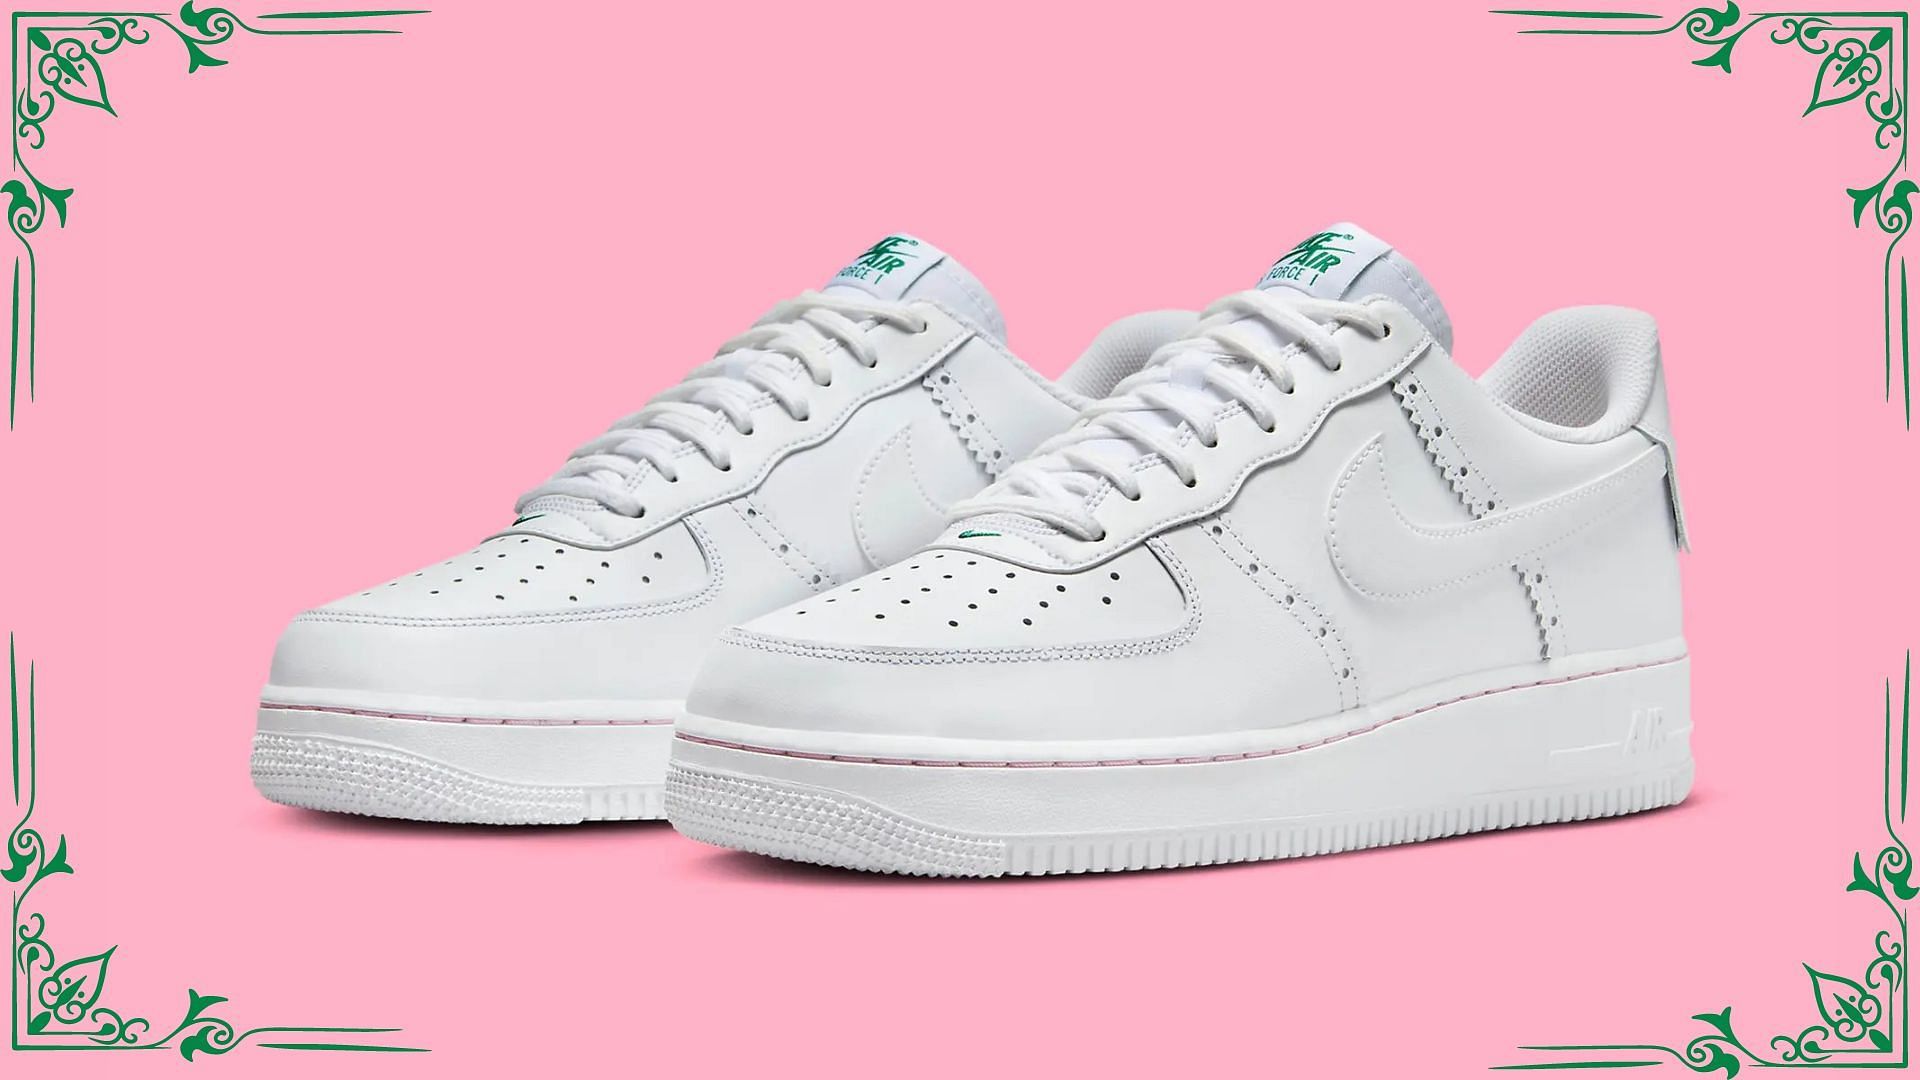 Nike Air Force 1 Low Brogue White sneakers